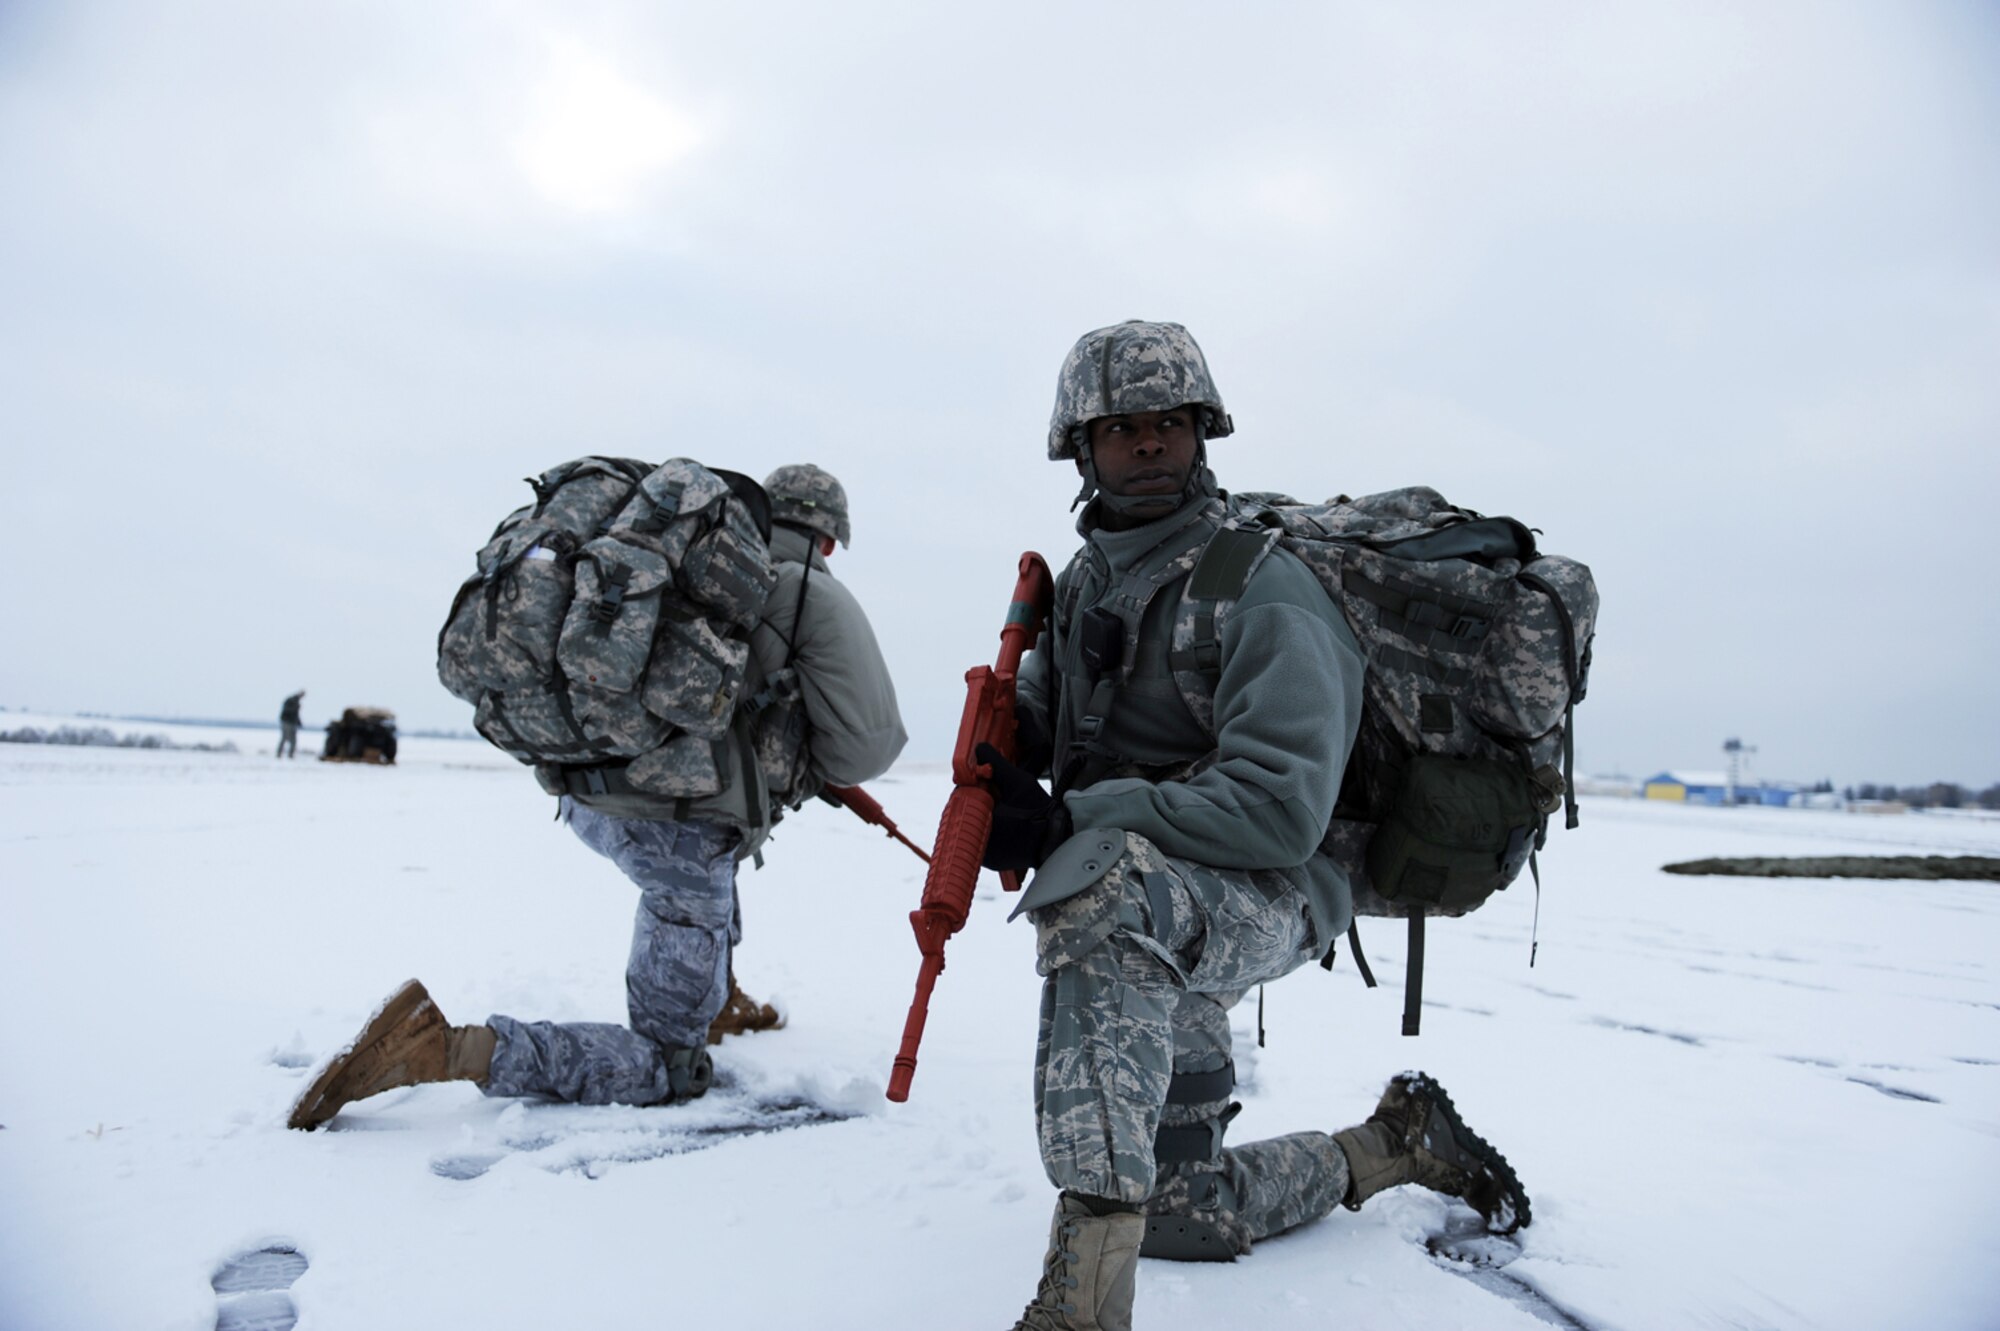 U.S. Air Force Capt. Mark Breed, 435th Security Forces Squadron (SFS), operations officer, and Master Sgt. Tyrone Morgan, 435th SFS, operations superintendent, Sembach Annex, Germany, secures a drop-zone during an insertion mission, Flugplatz Bitburg, Germany, Jan. 25, 2010, in preparation of Ramstein's operational readiness inspection in September. The unit is setting up bare-base operations as part of the dual-wing operational readiness exercise with the 86th Airlift Wing. This is the second of five operational readiness exercises. (U.S. Air Force photo by Staff Sgt. Sarayuth Pinthong)